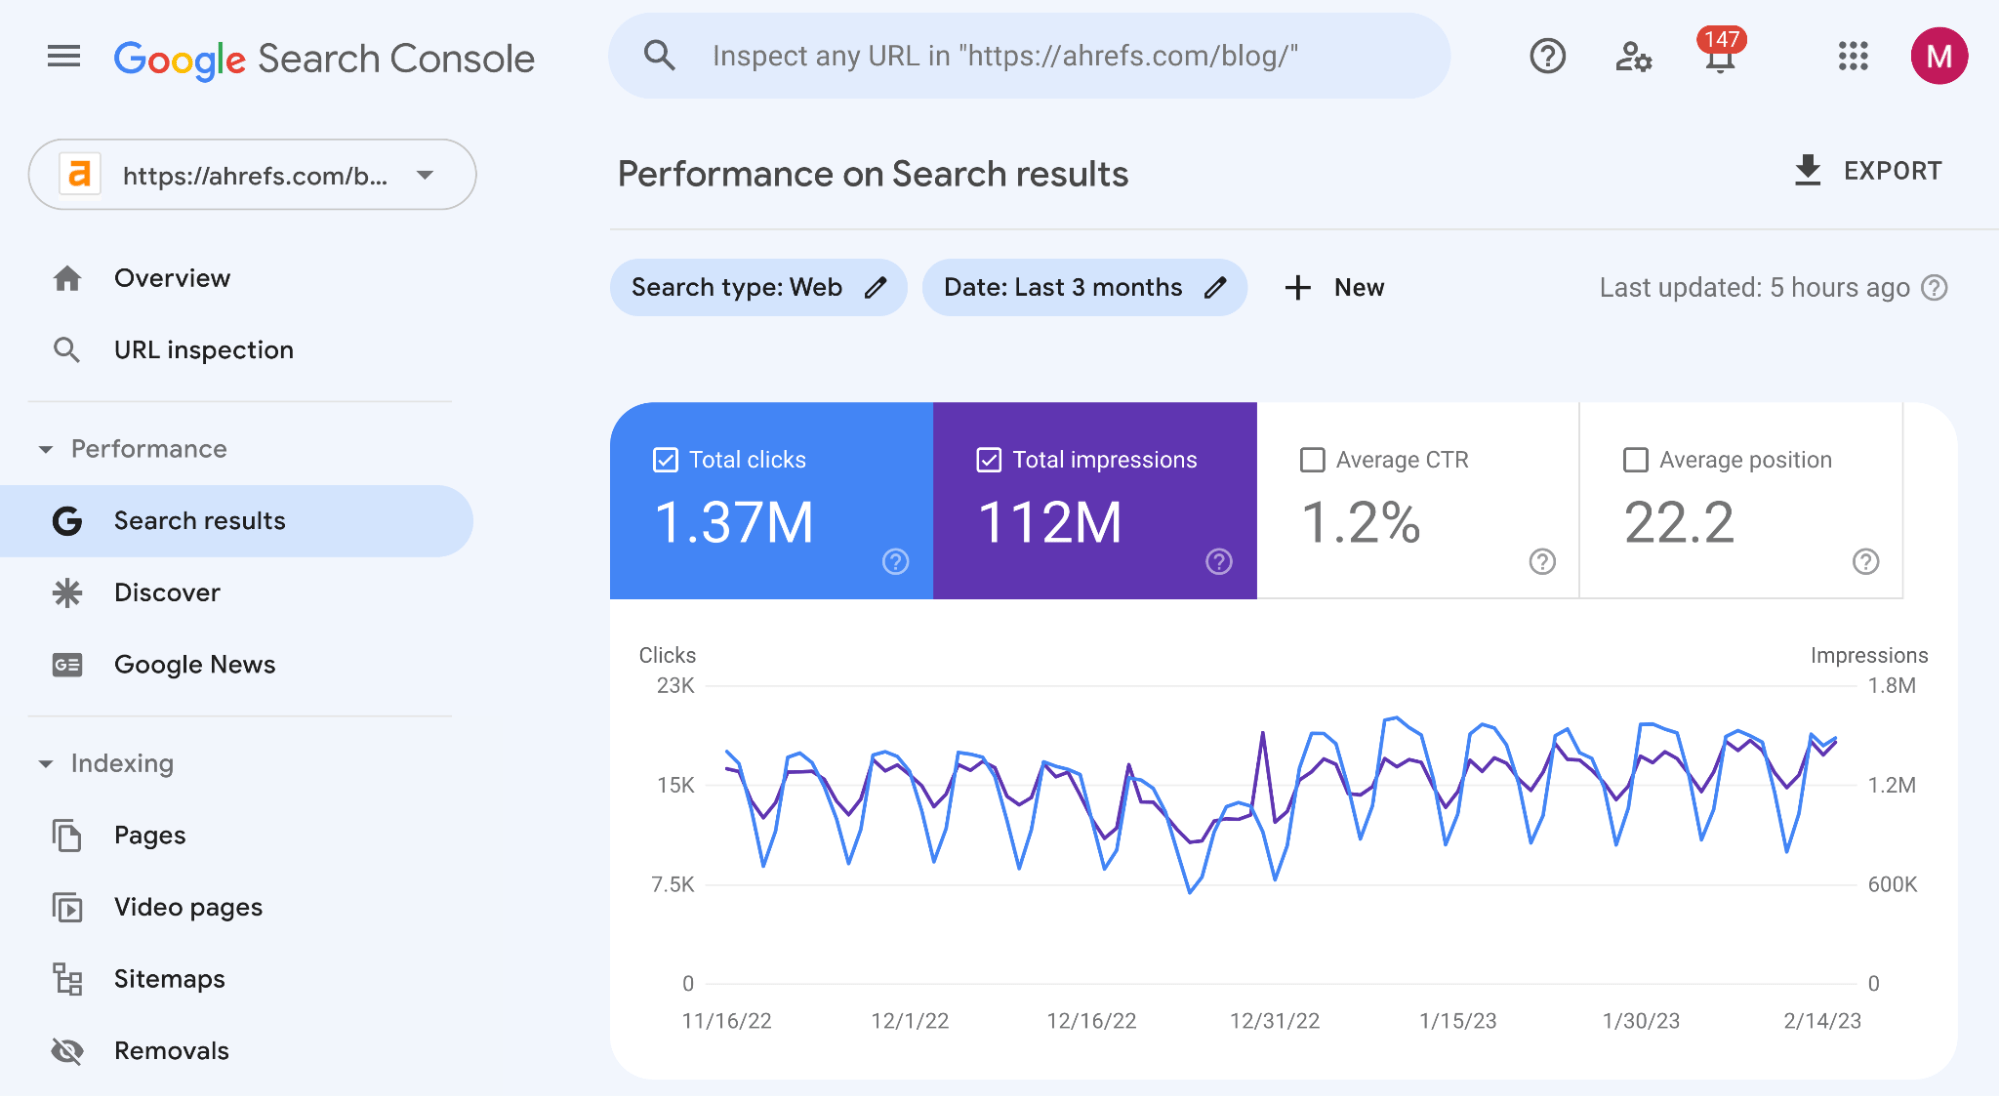 How to Measure SEO Performance & Results (The Right Way)